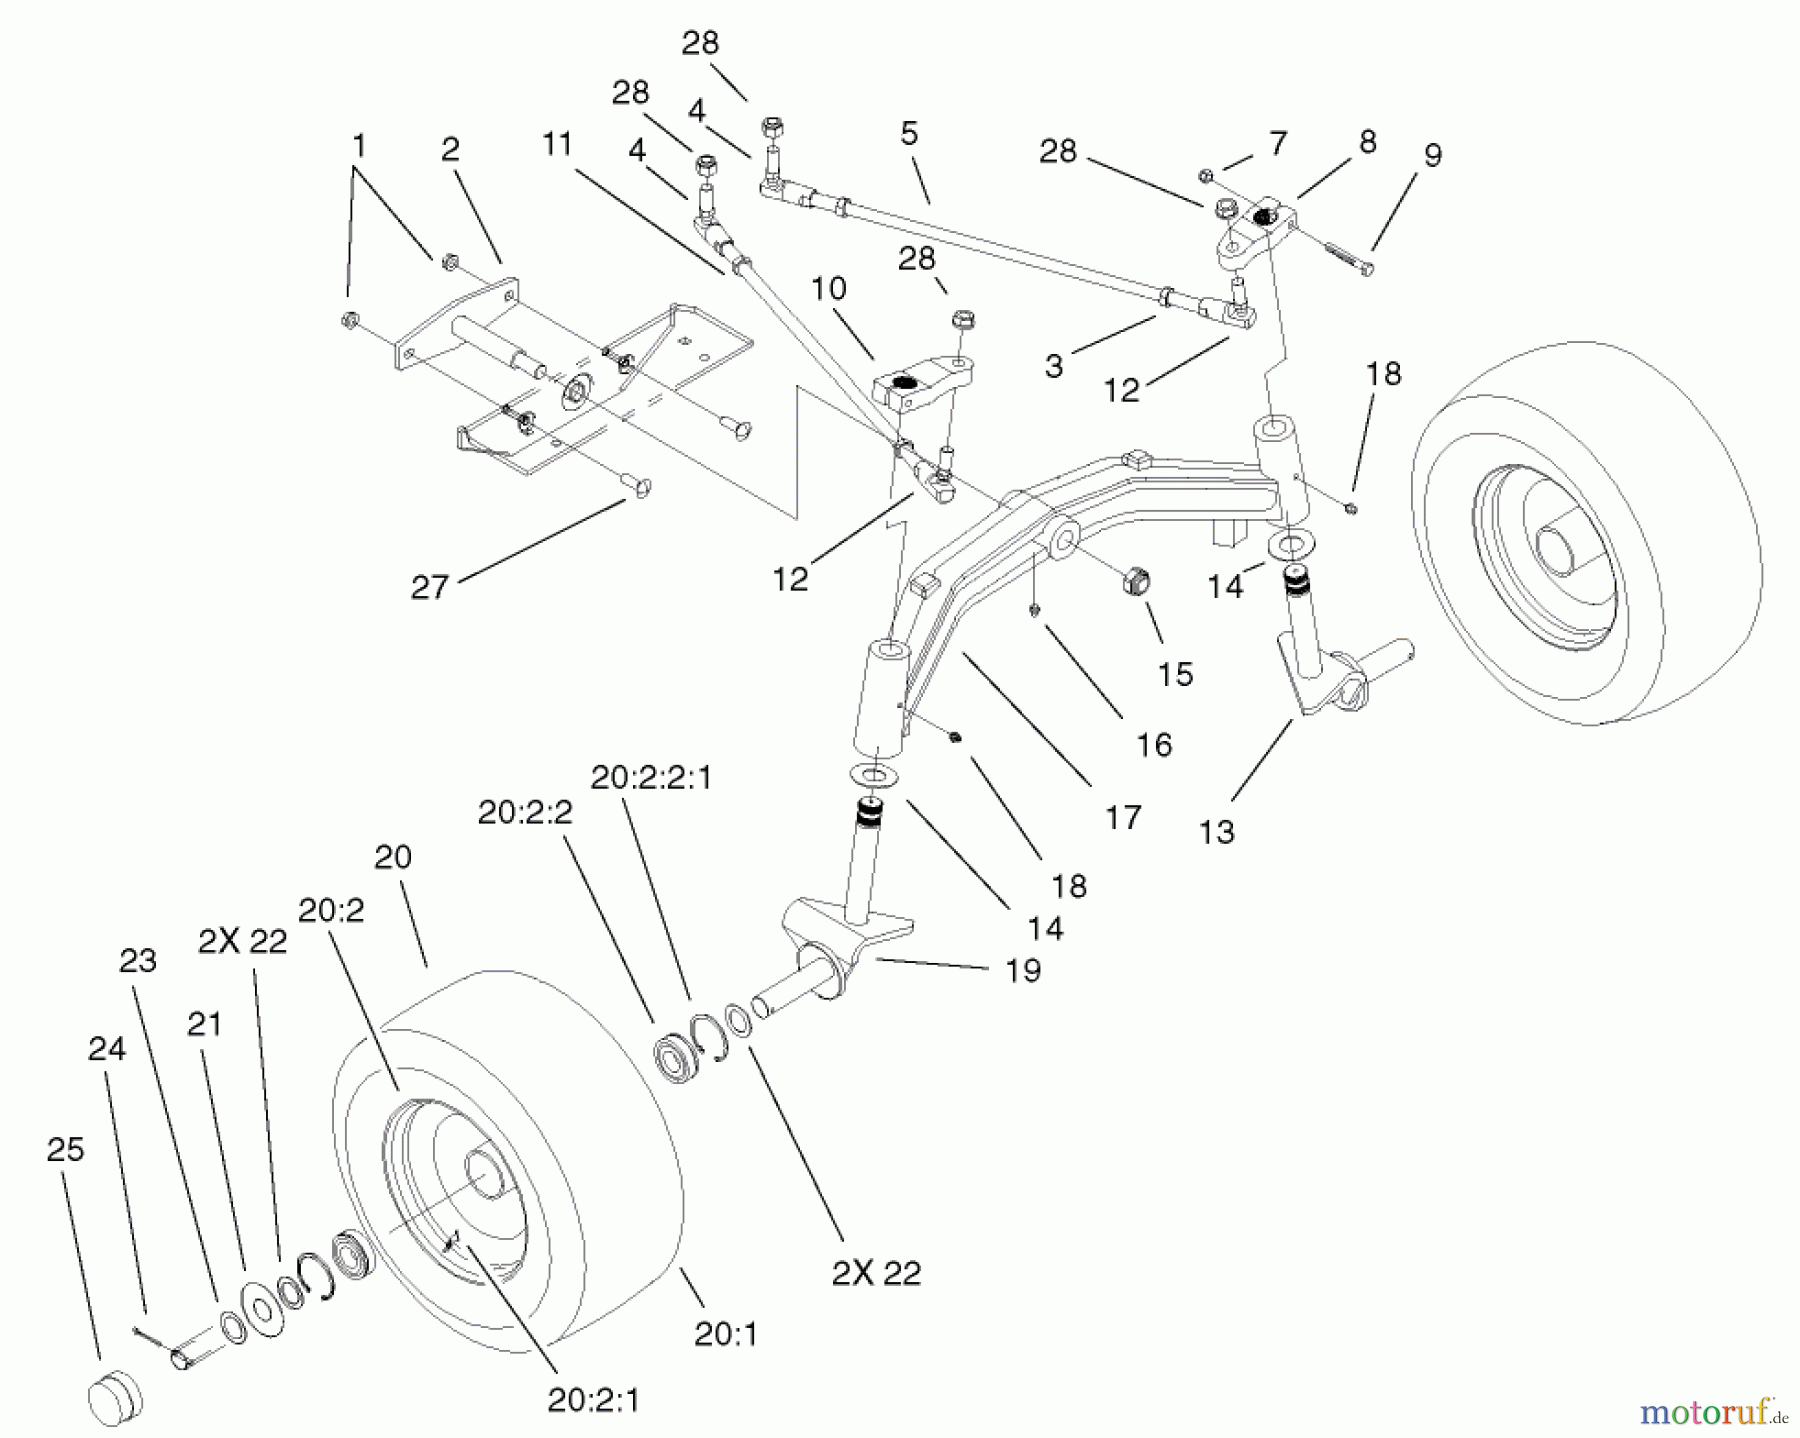  Toro Neu Mowers, Lawn & Garden Tractor Seite 1 73561 (522xi) - Toro 522xi Garden Tractor, 2004 (240000001-240999999) TIE RODS, SPINDLE & FRONT AXLE ASSEMBLY